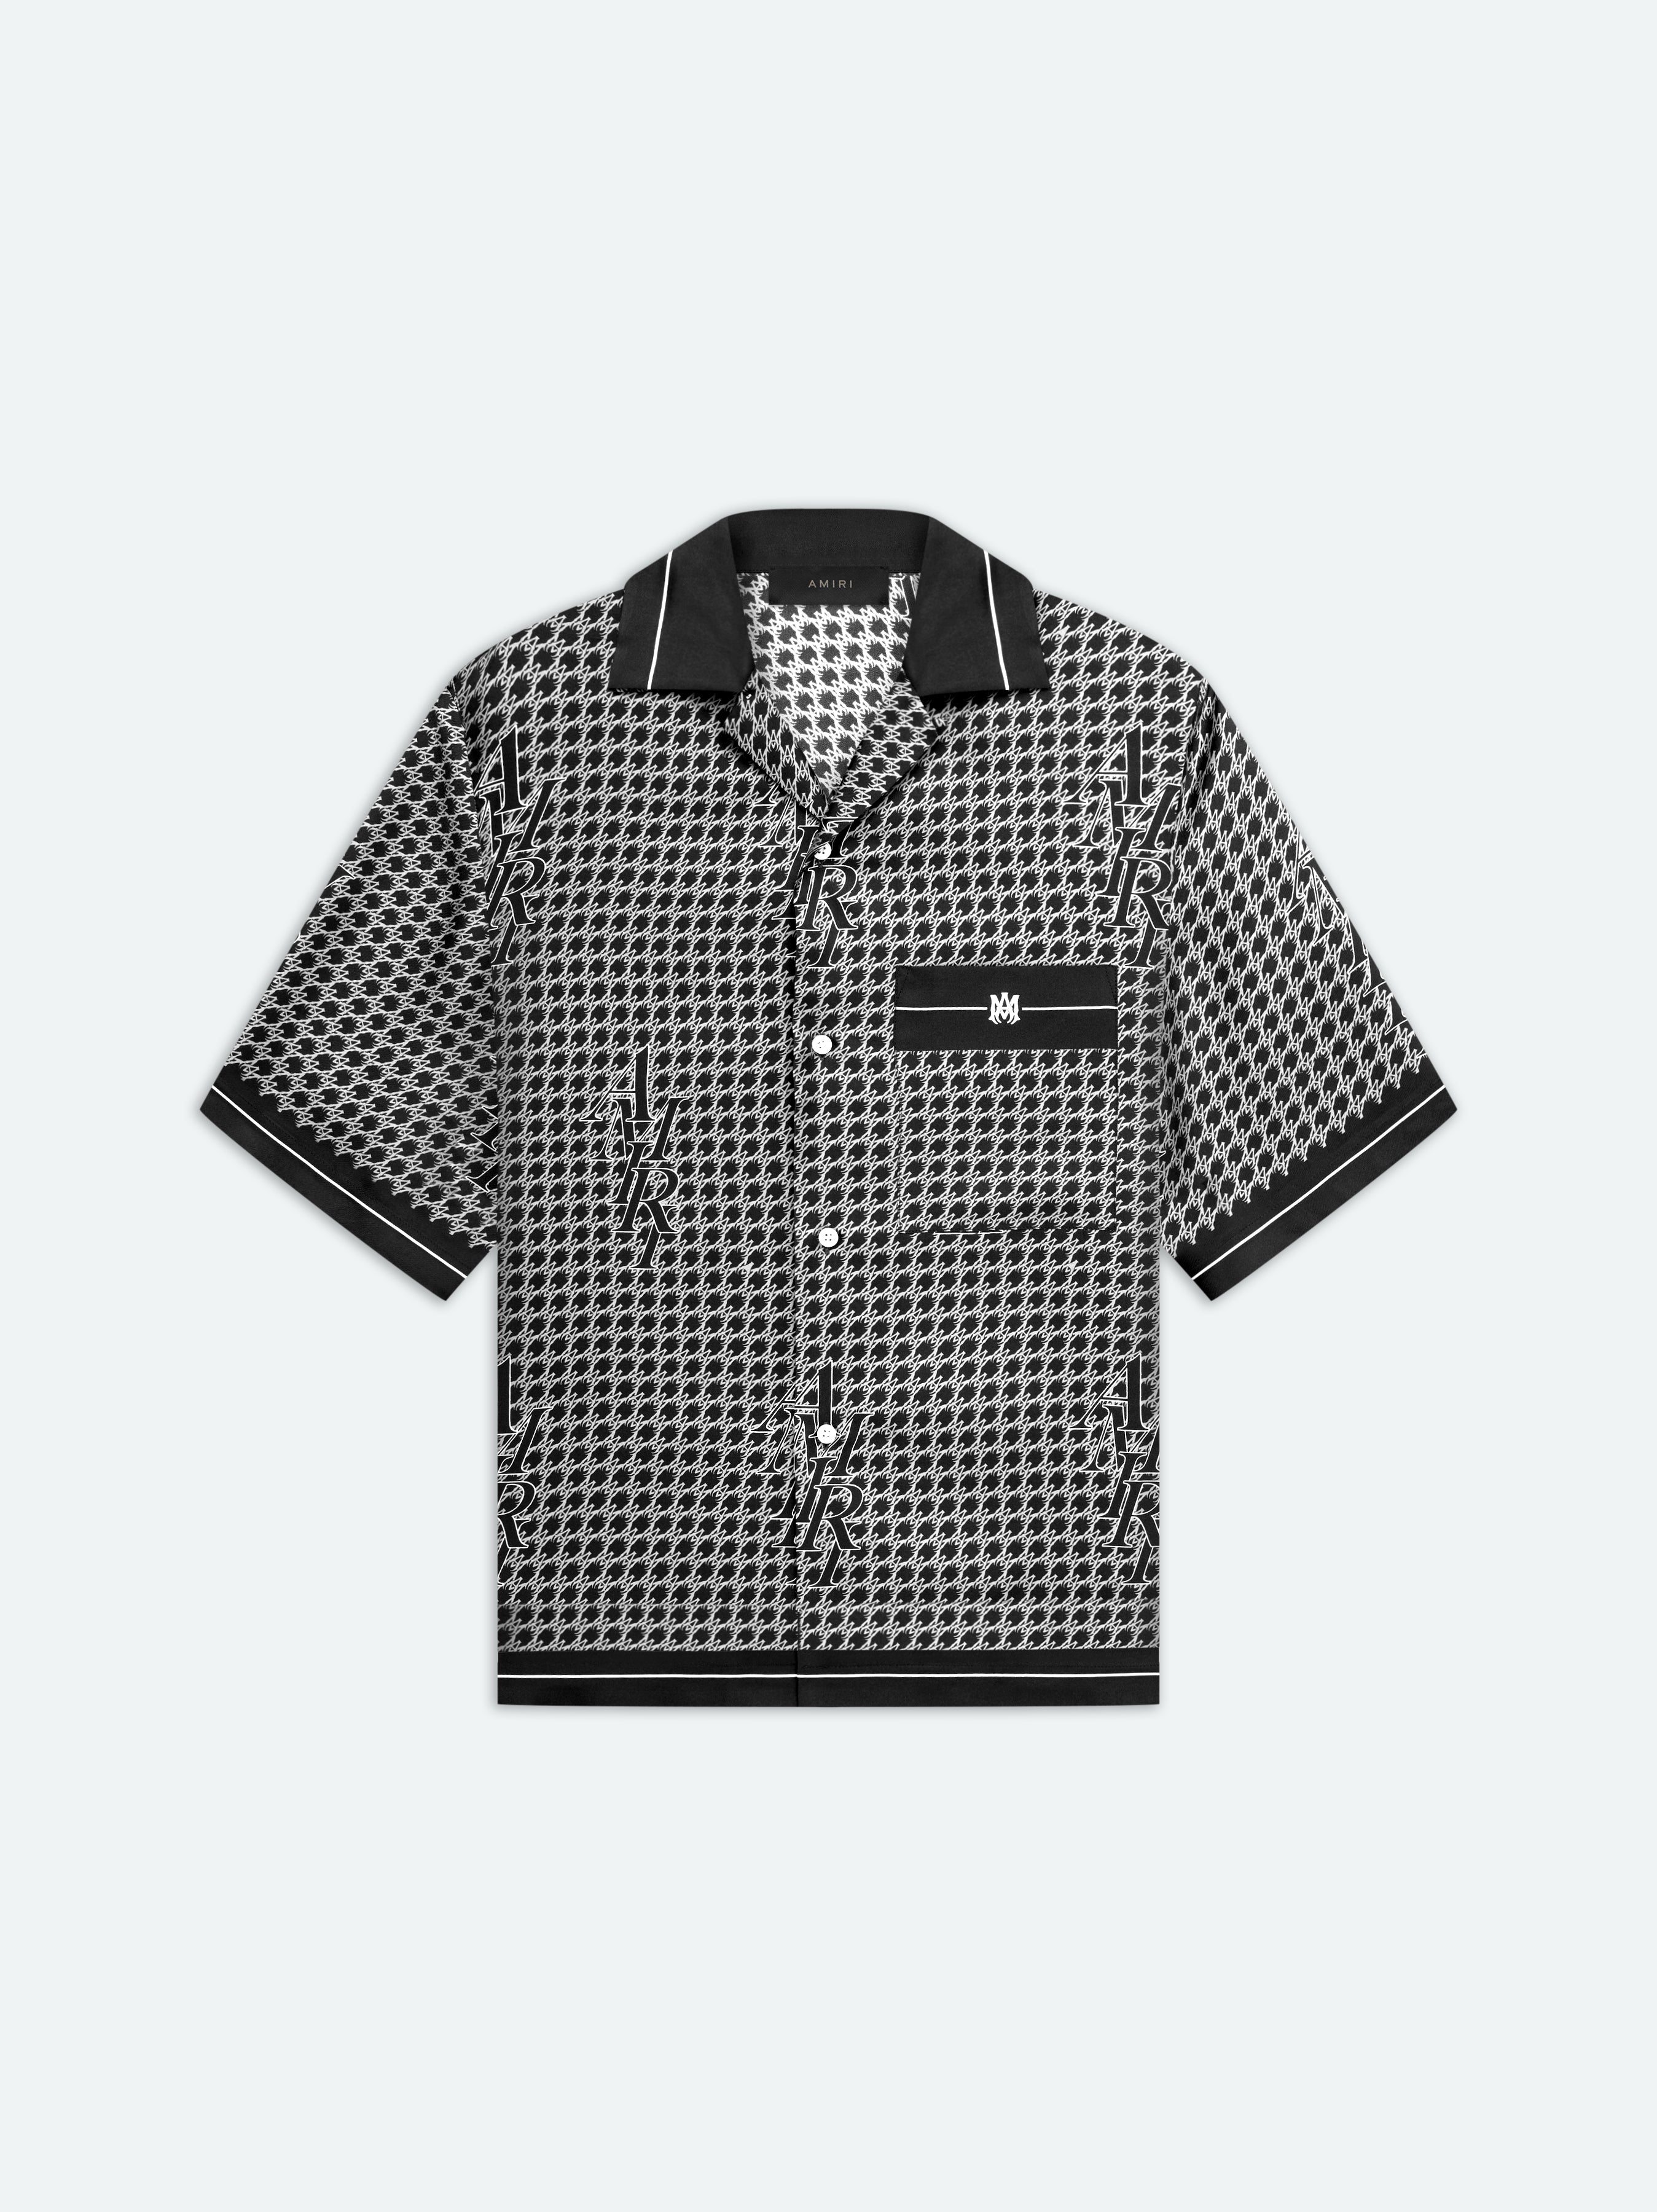 Product AMIRI HOUNDSTOOTH BOWLING SHIRT - Black featured image